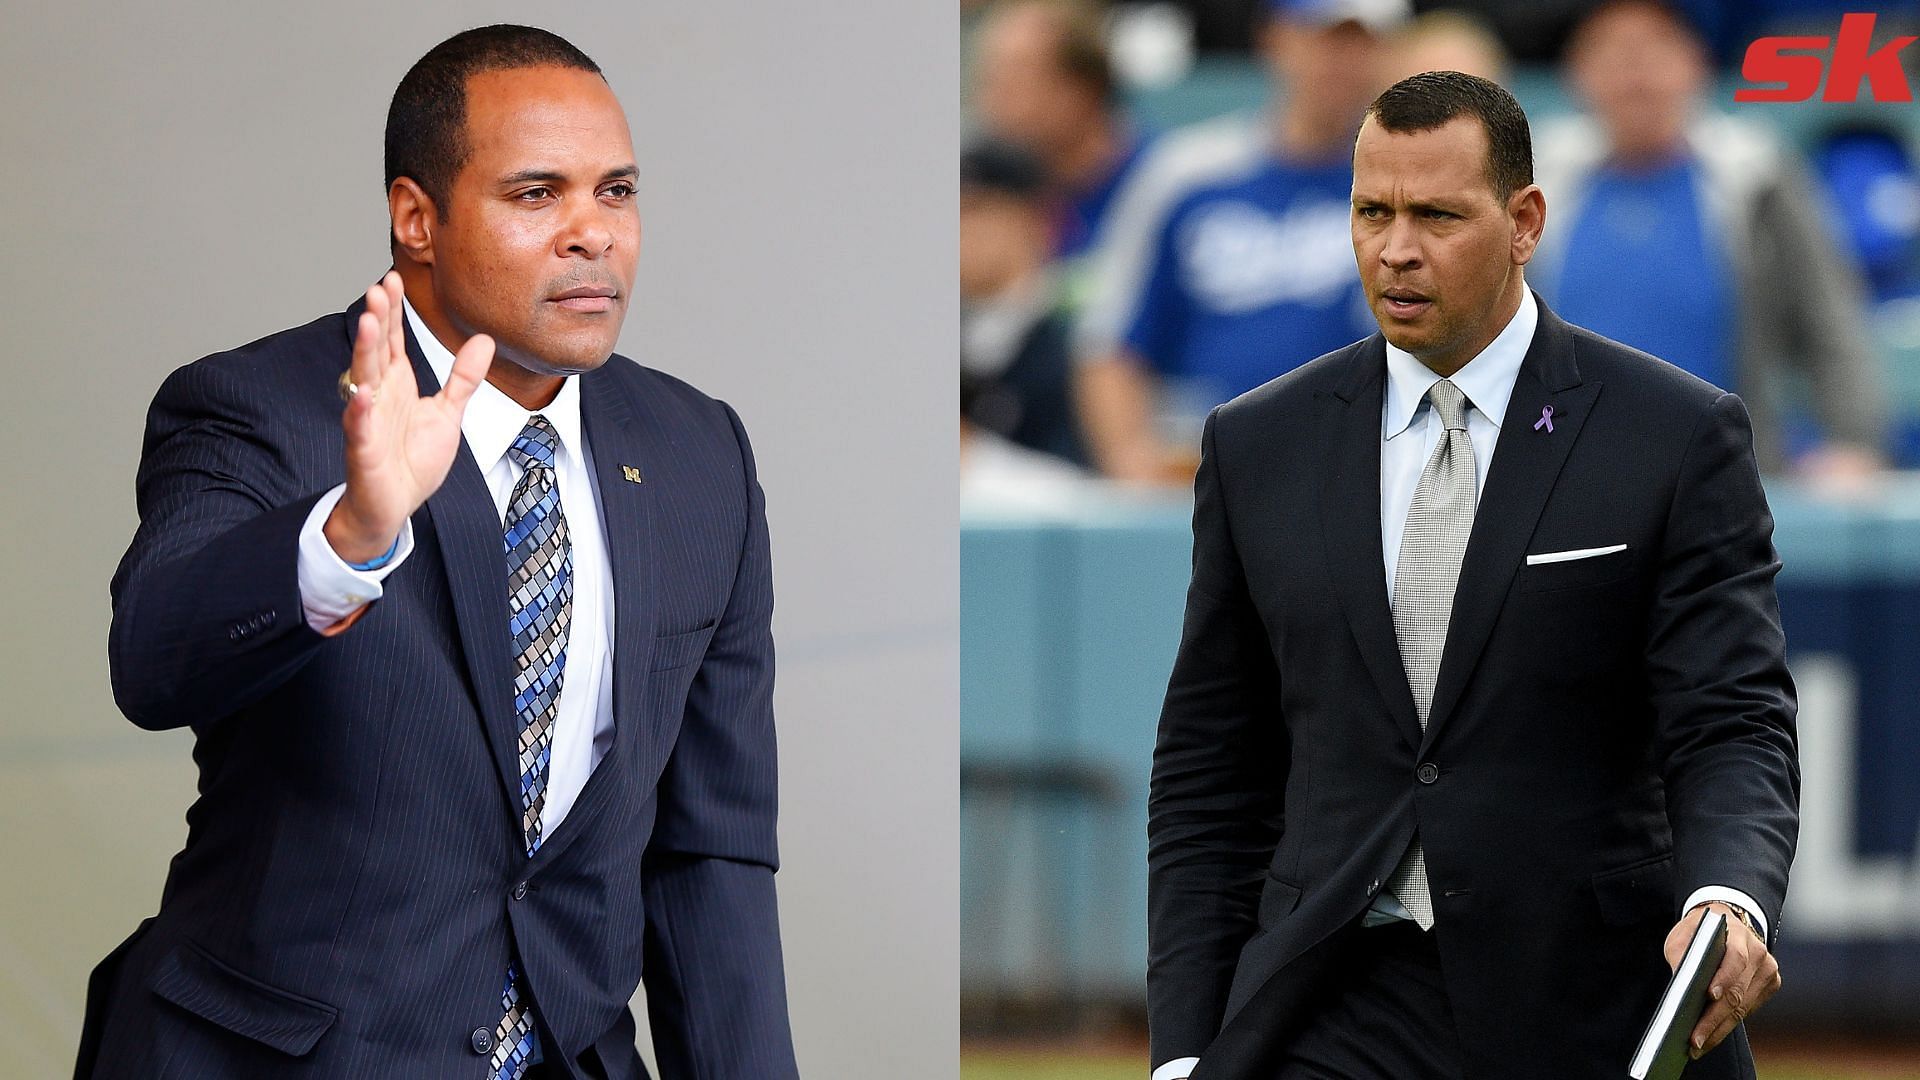 Barry Larkin believes Alex Rodriguez was trying to play low the controversy of the Biogenesis scandal